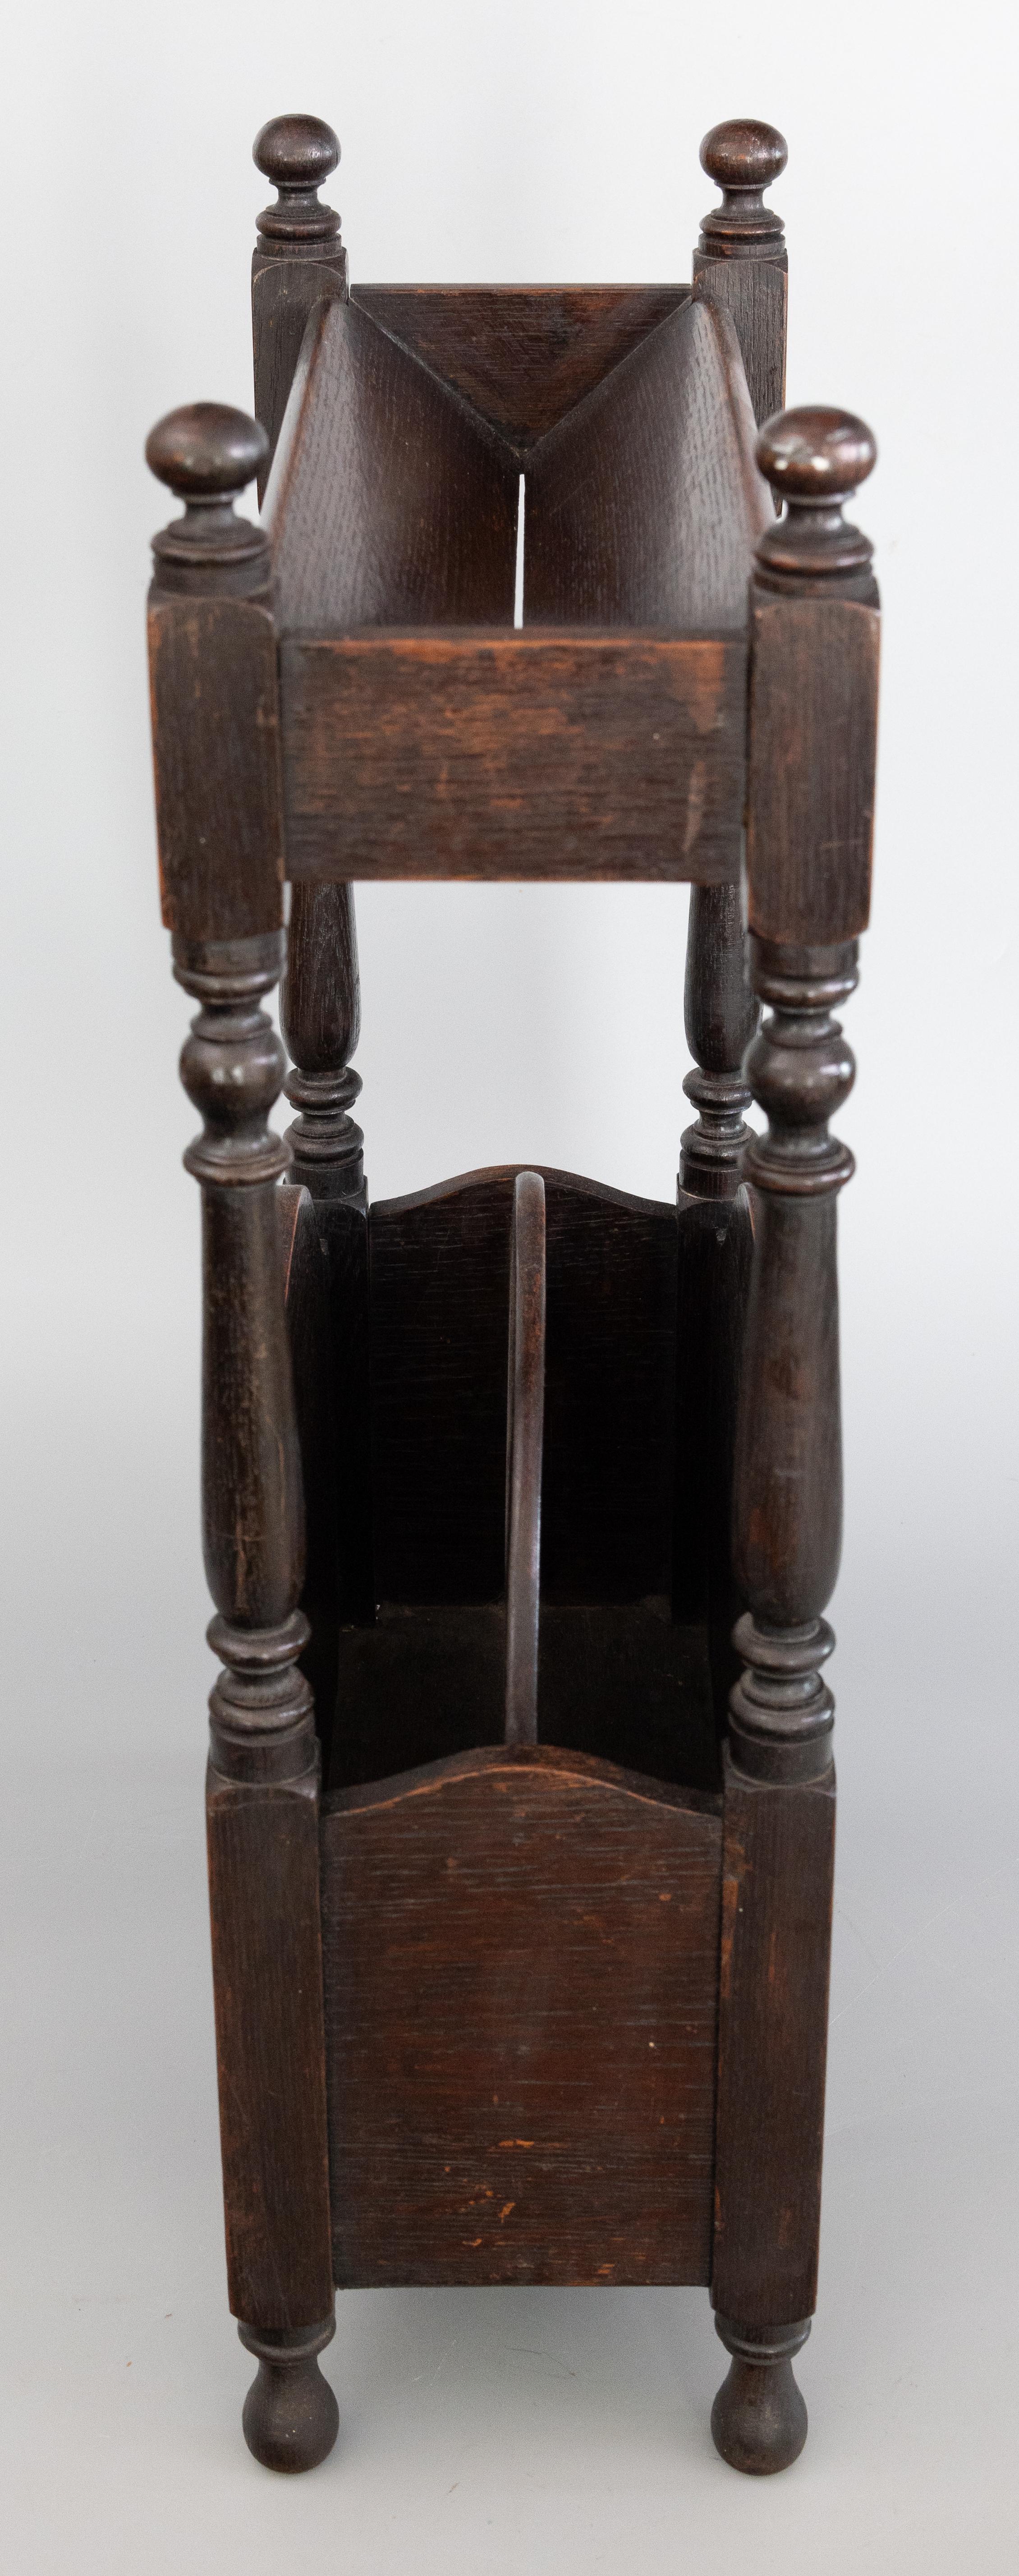 Hand-Carved Antique English Carved Oak Library Book Trough and Magazine Rack Stand, c. 1910 For Sale